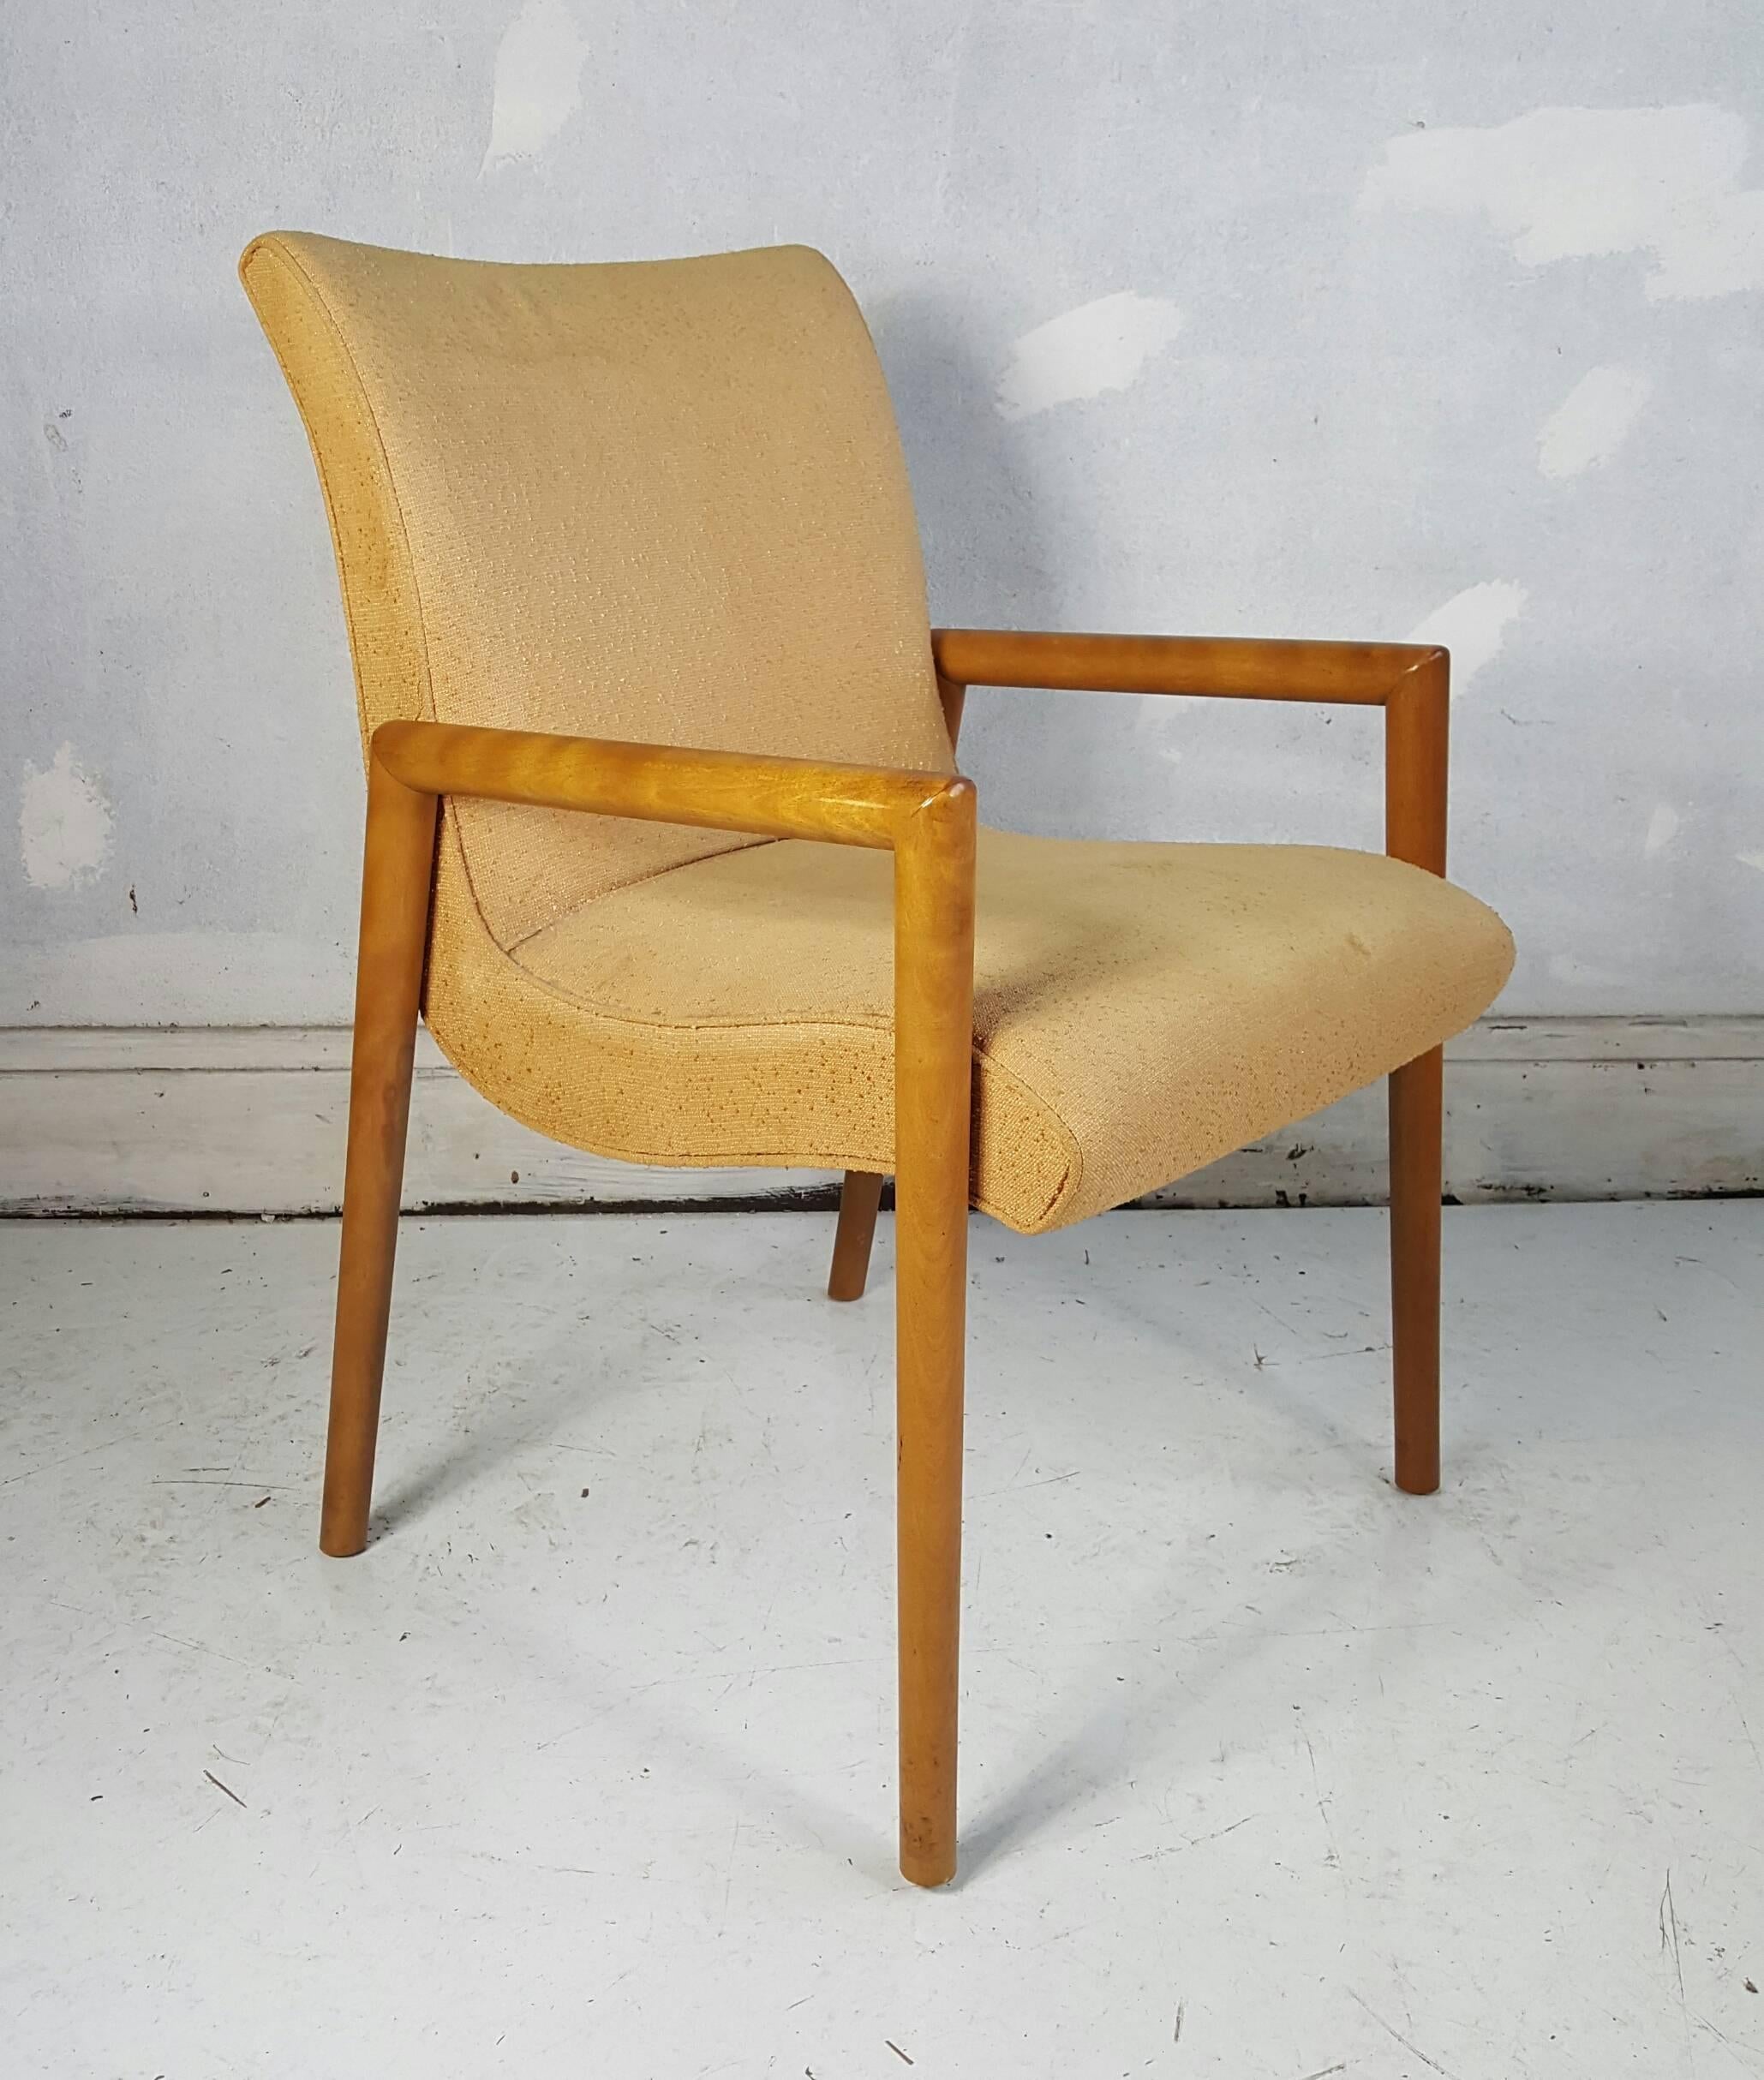 Set of four Russel Wright for Conant Ball dining chairs, Classic modernist design, set consists of three side chairs and one armchair. Retain original cloth fabric upholstery.